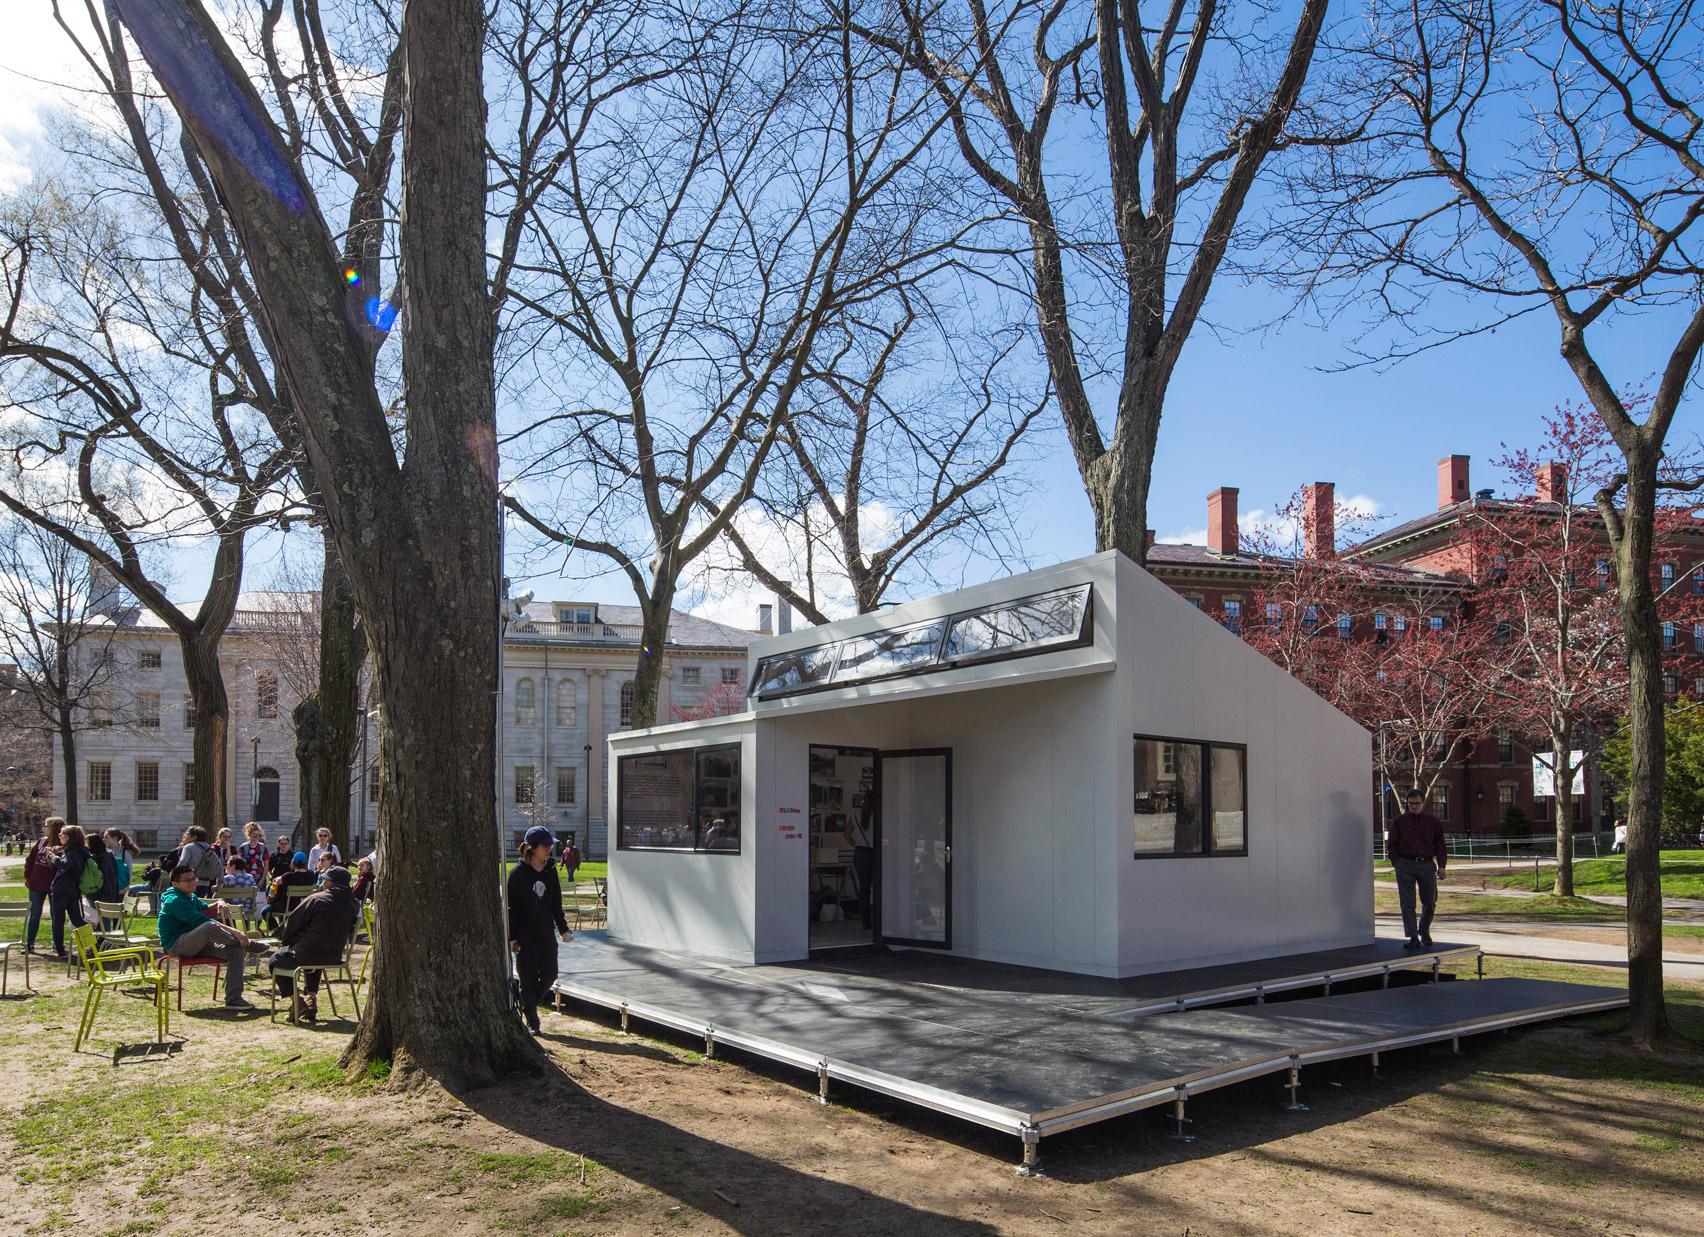 Beijing's backyard Plugin House could help with the housing crisis in the US